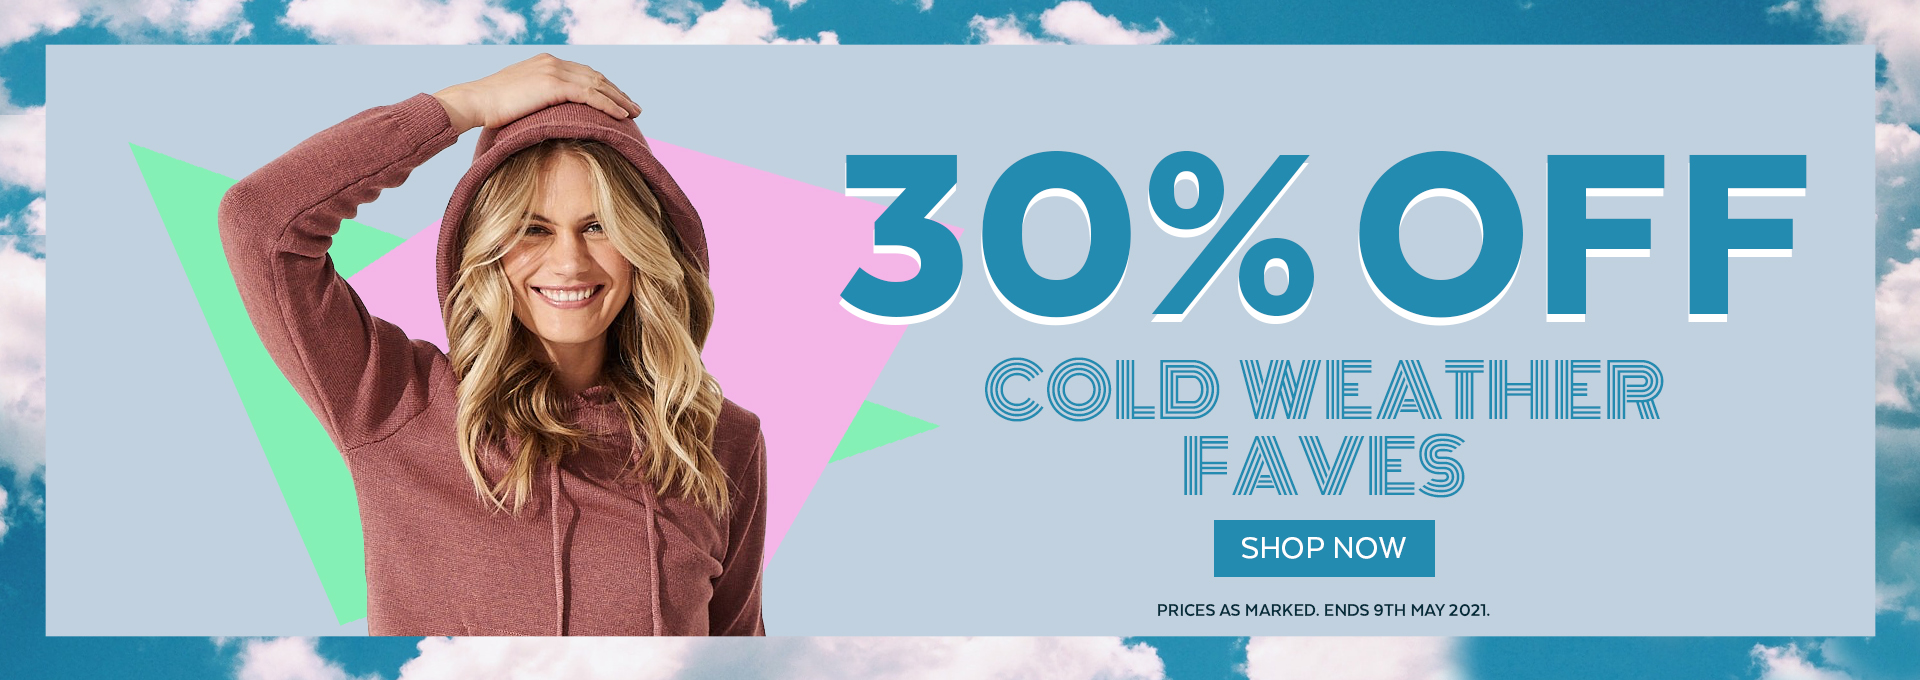 Save 30% OFF on cold weather faves plus extra 20% OFF